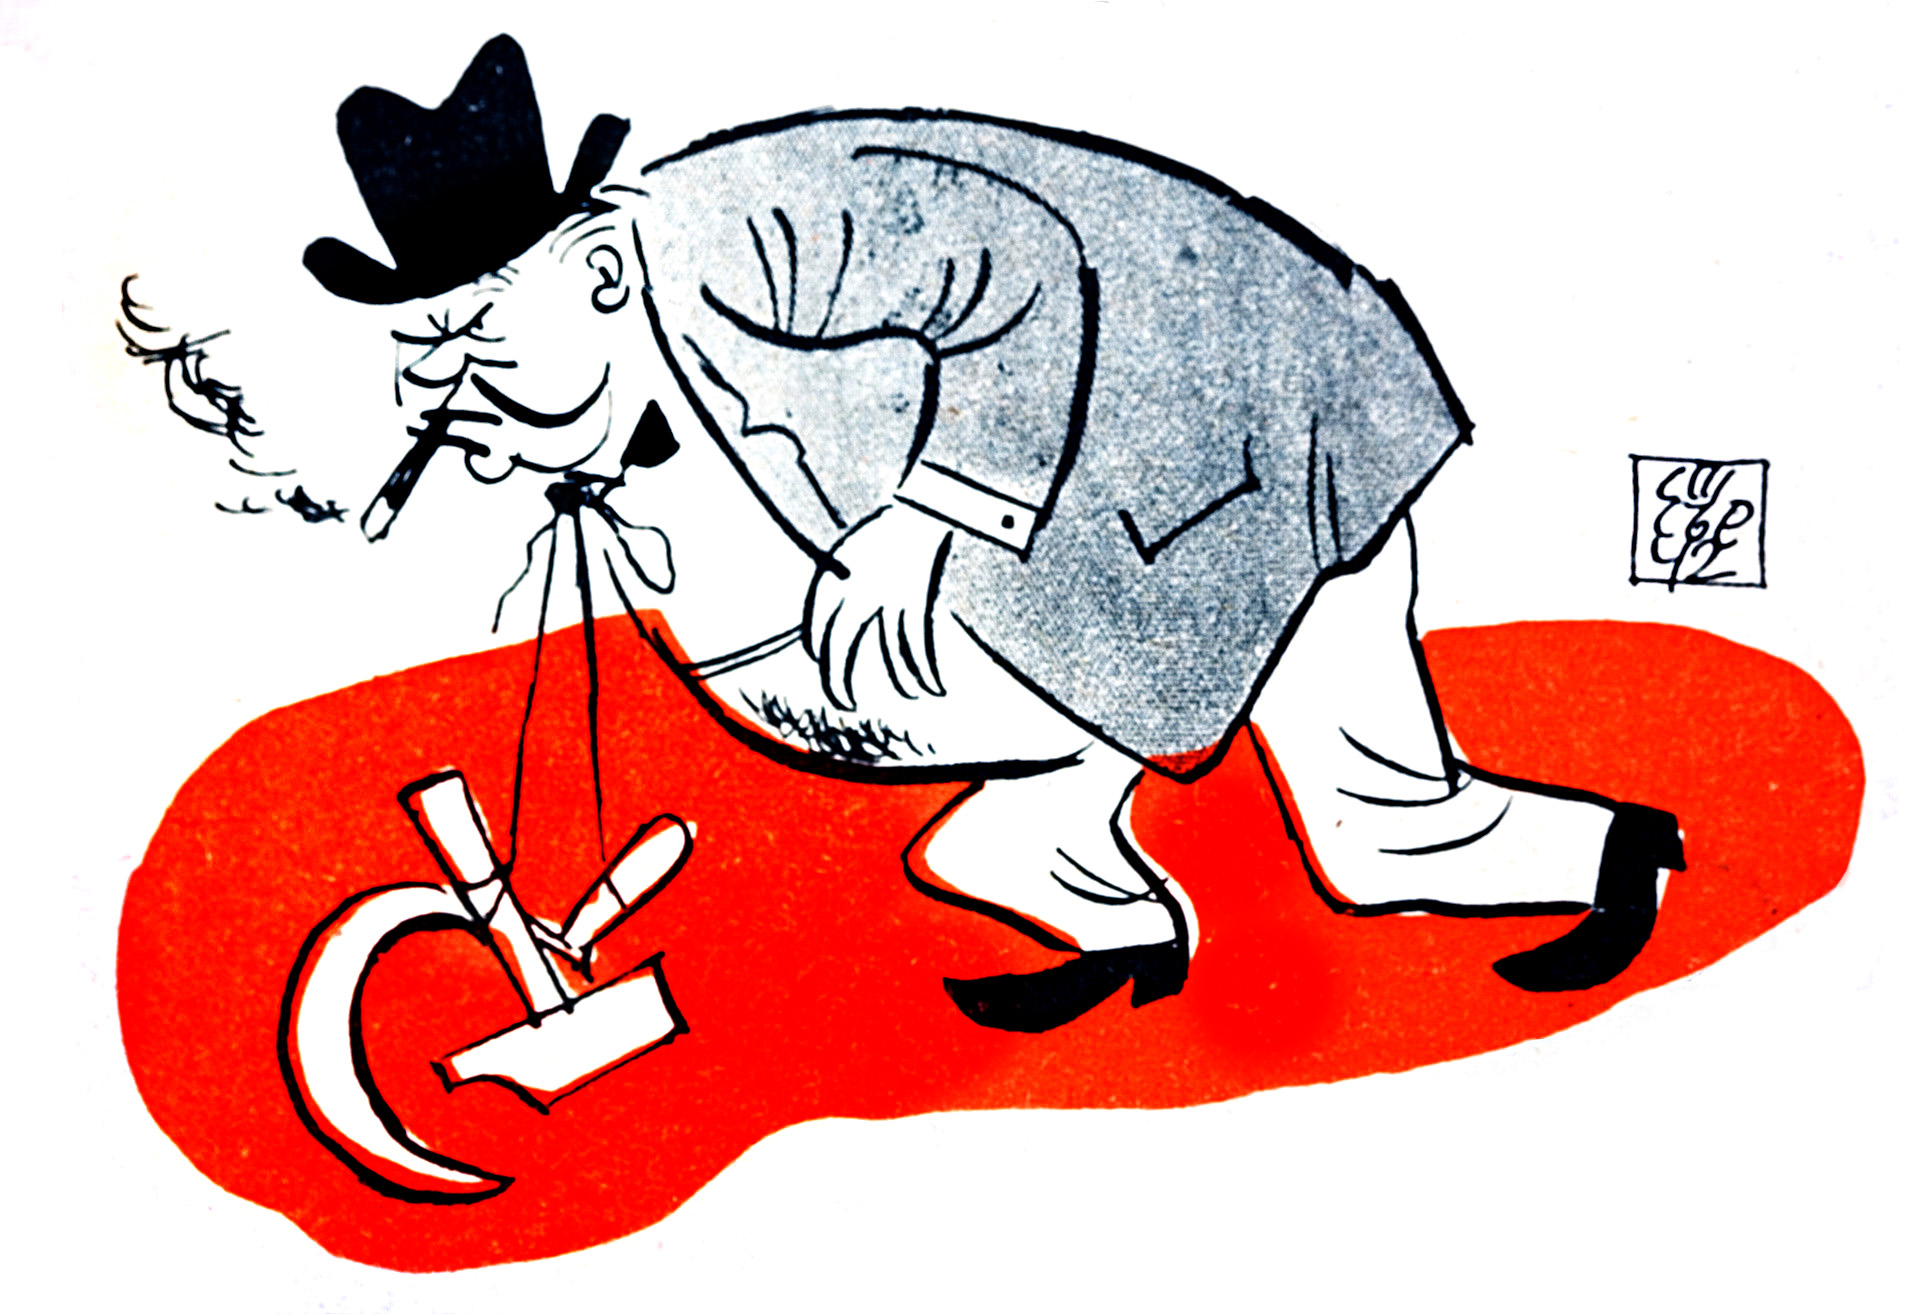 In this political cartoon, British Prime Minister Winston Churchill is weighed down by his alliance with the Soviet Union, symbolized by the hammer and sickle tethered from Churchill’s neck.  